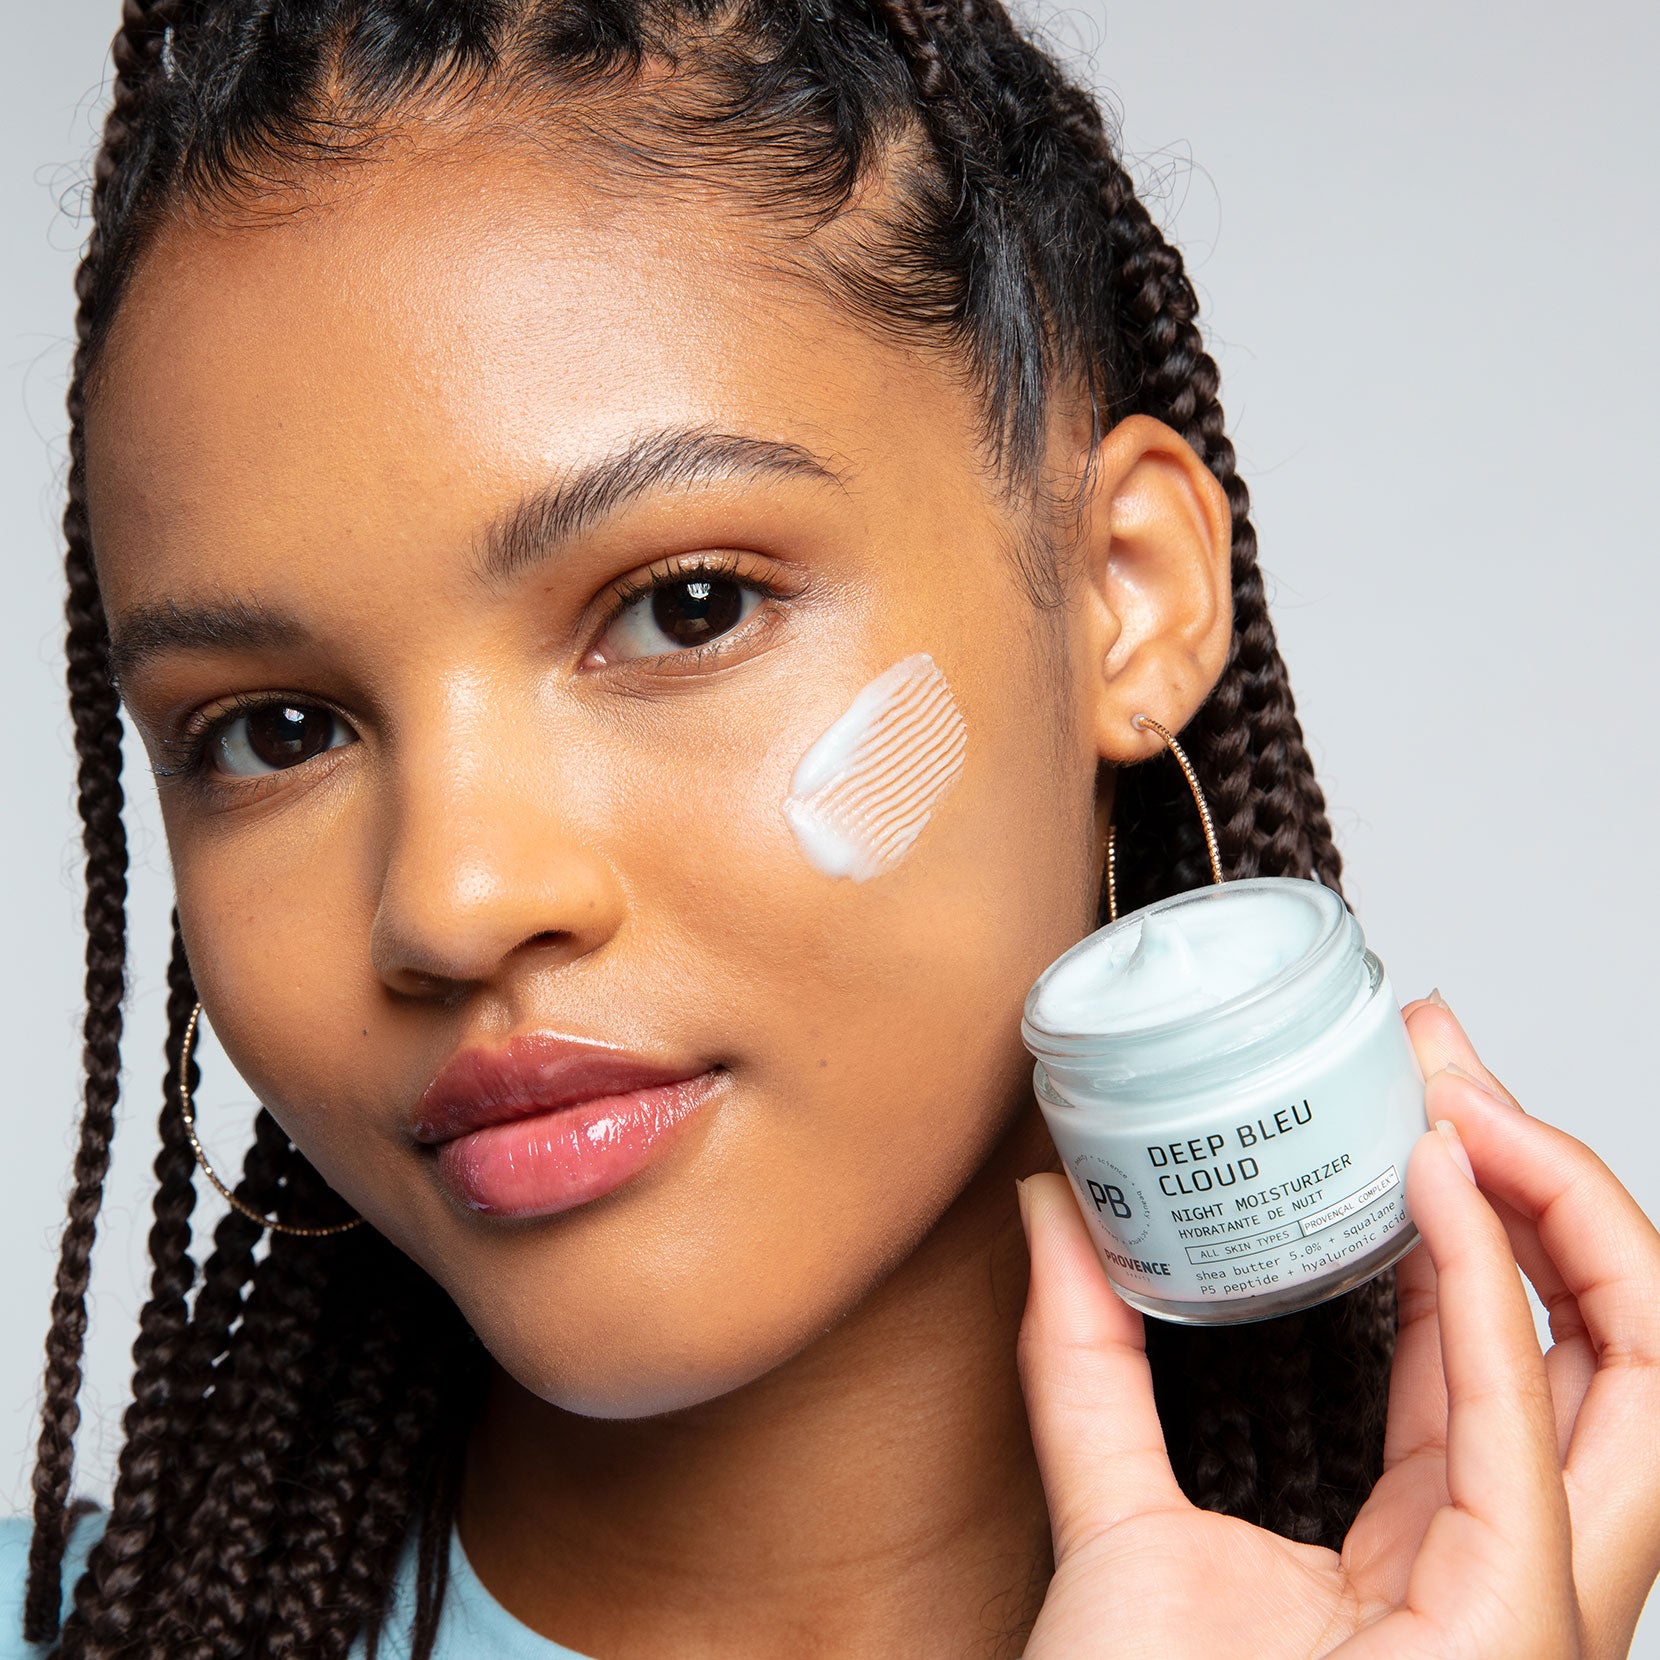 A model with glowing skin and braids posing with the Deep Bleu Cloud Night Moisturizer with a smoosh of the cream on her cheek. Due to its thickness there are streaks in the product from the spatula that smeared the product on her face.